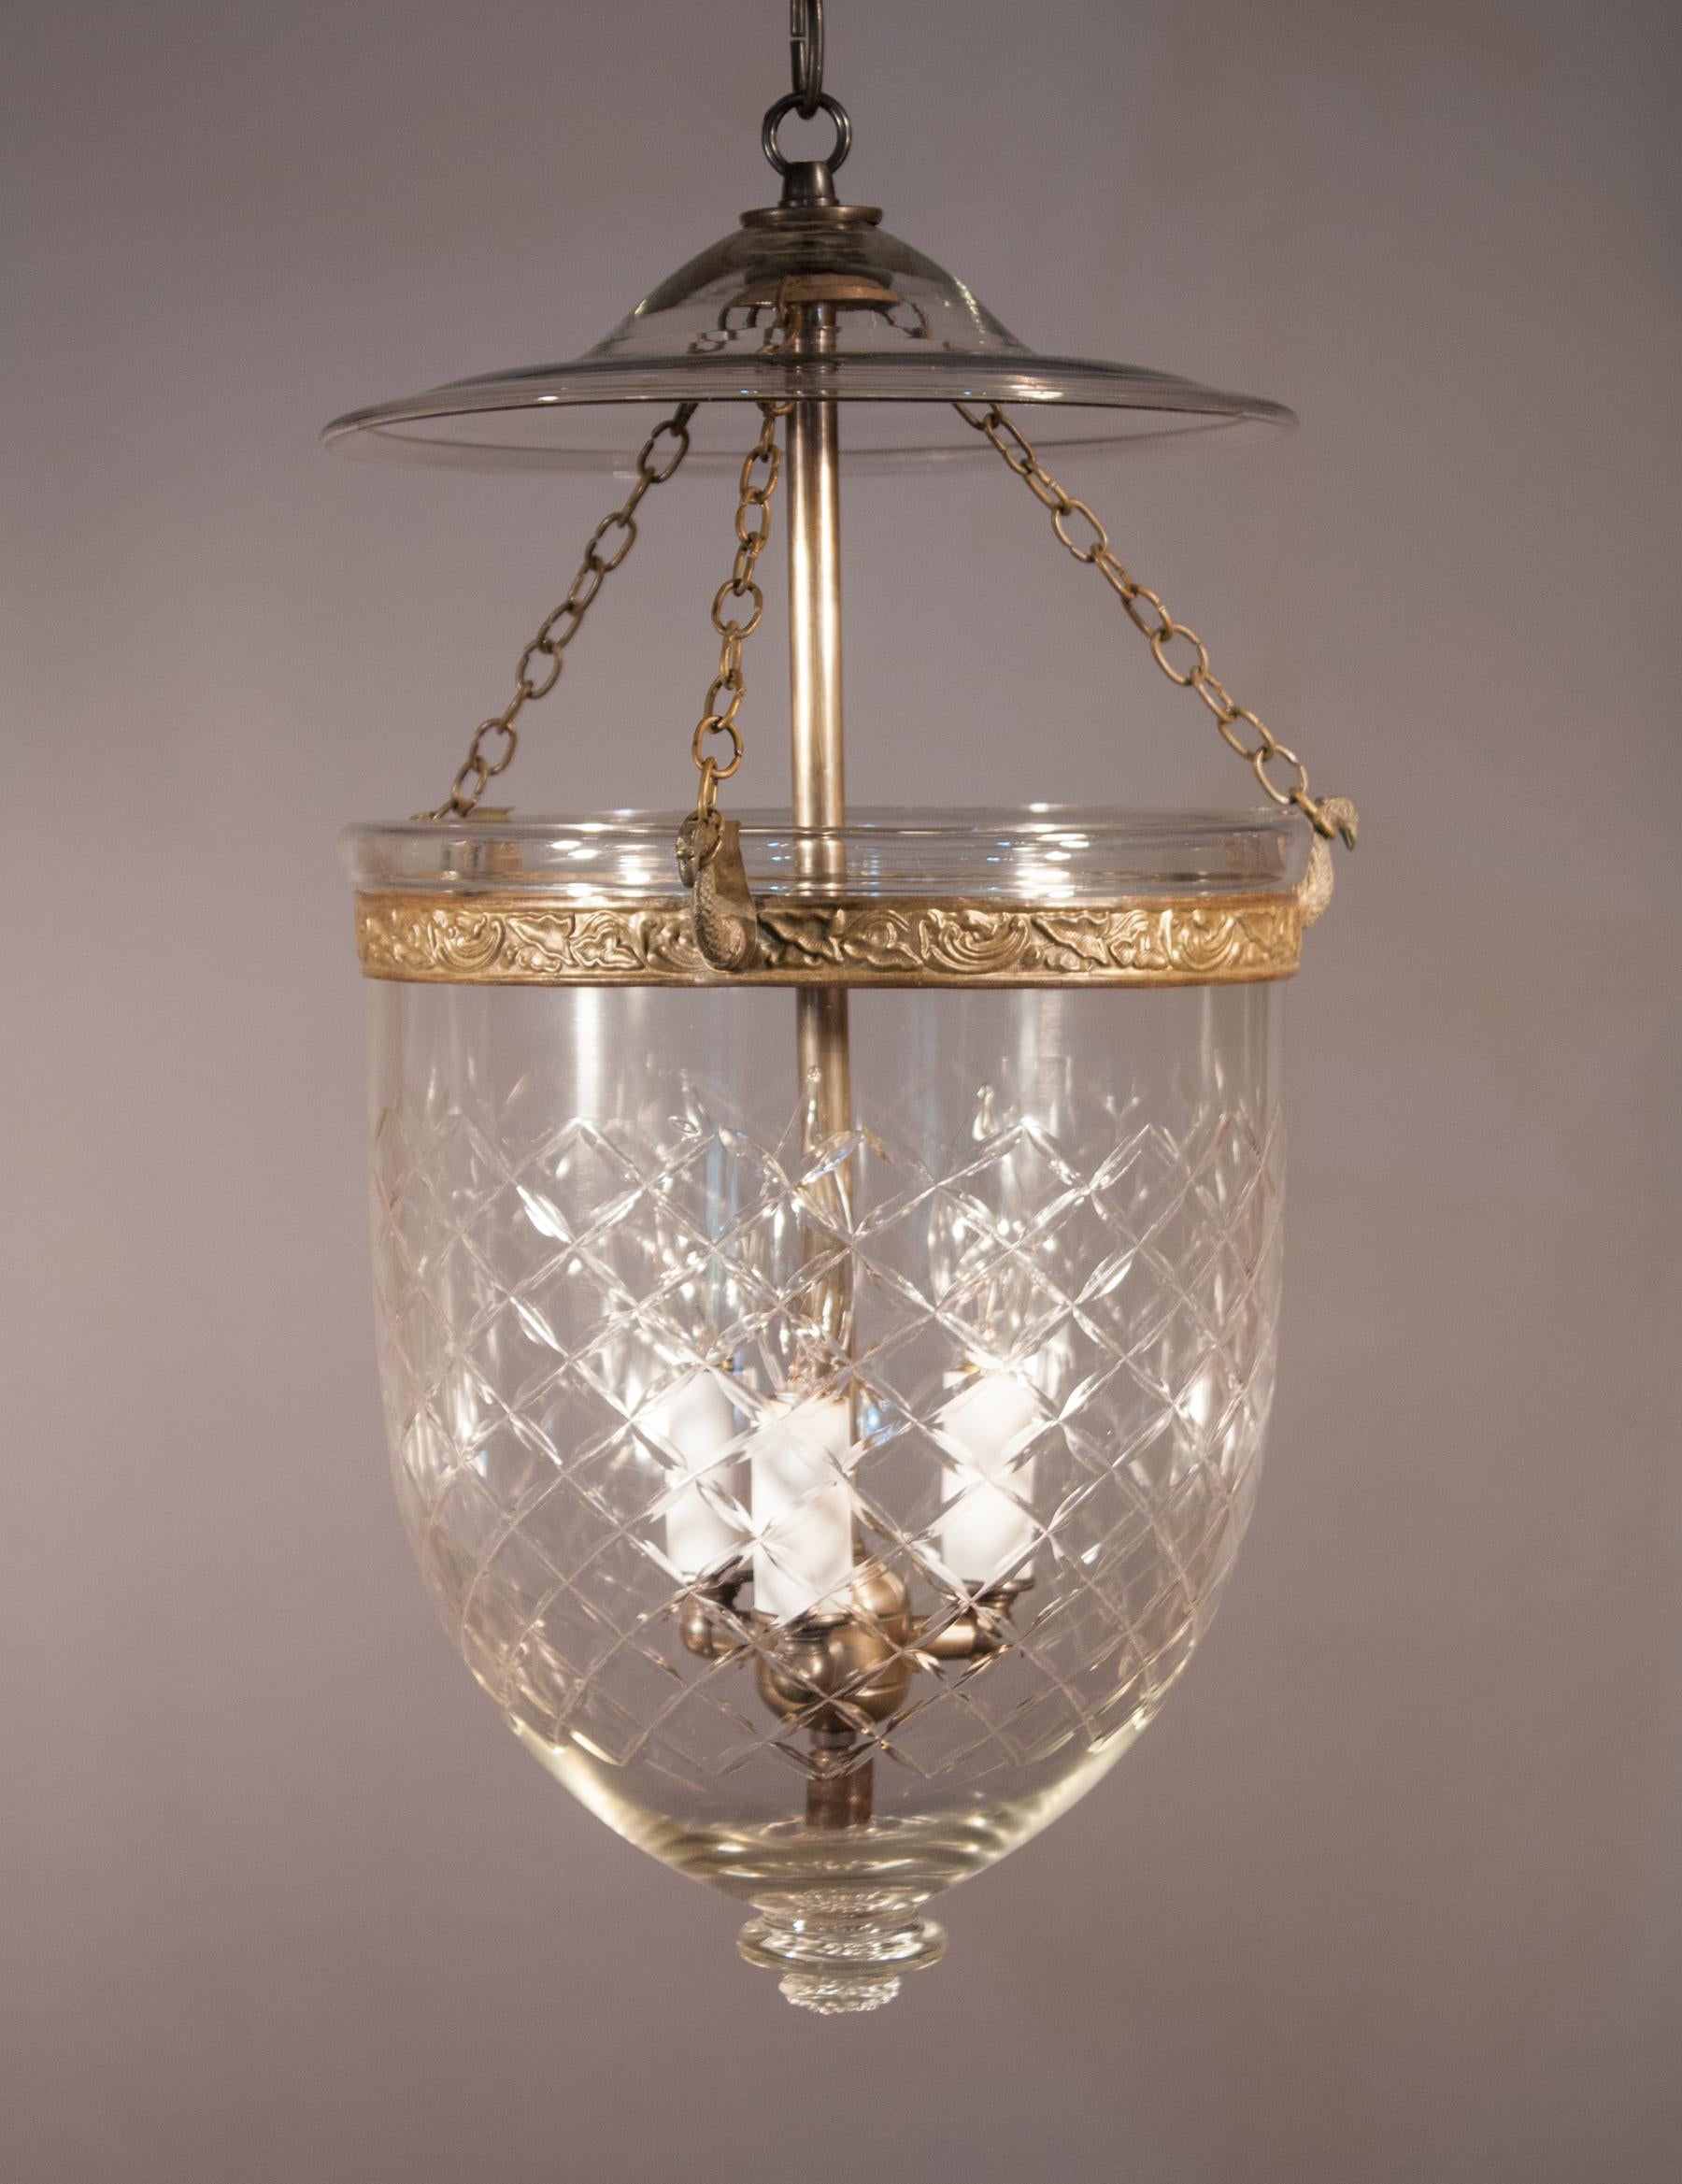 An authentic bell jar lantern with lovely form and an etched diamond motif. This circa 1890 lantern features excellent quality hand blown glass, with several visible air bubbles. The embossed brass band, which has a vine motif, has been replaced for